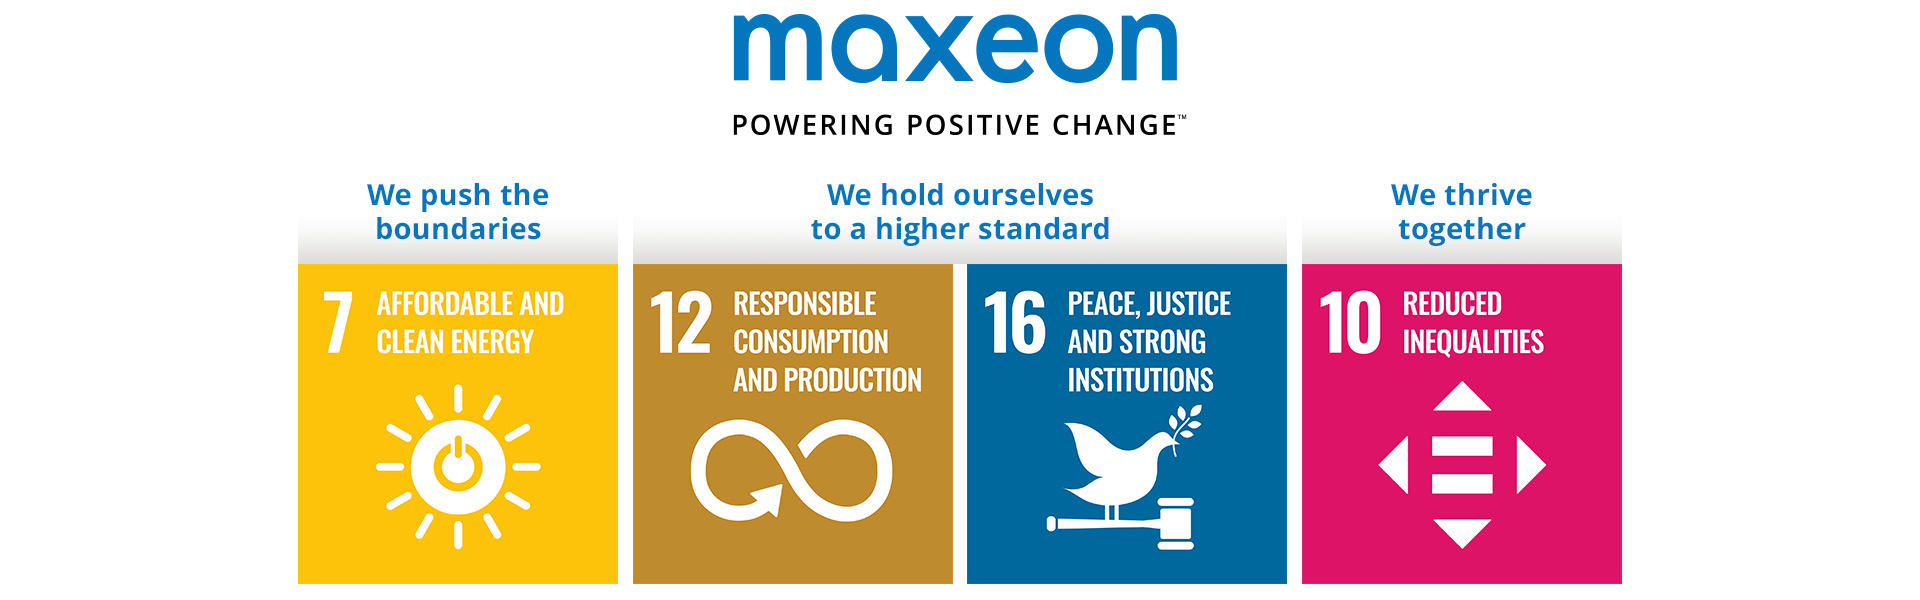 Maxeon Joining UN Global Compact Commitments